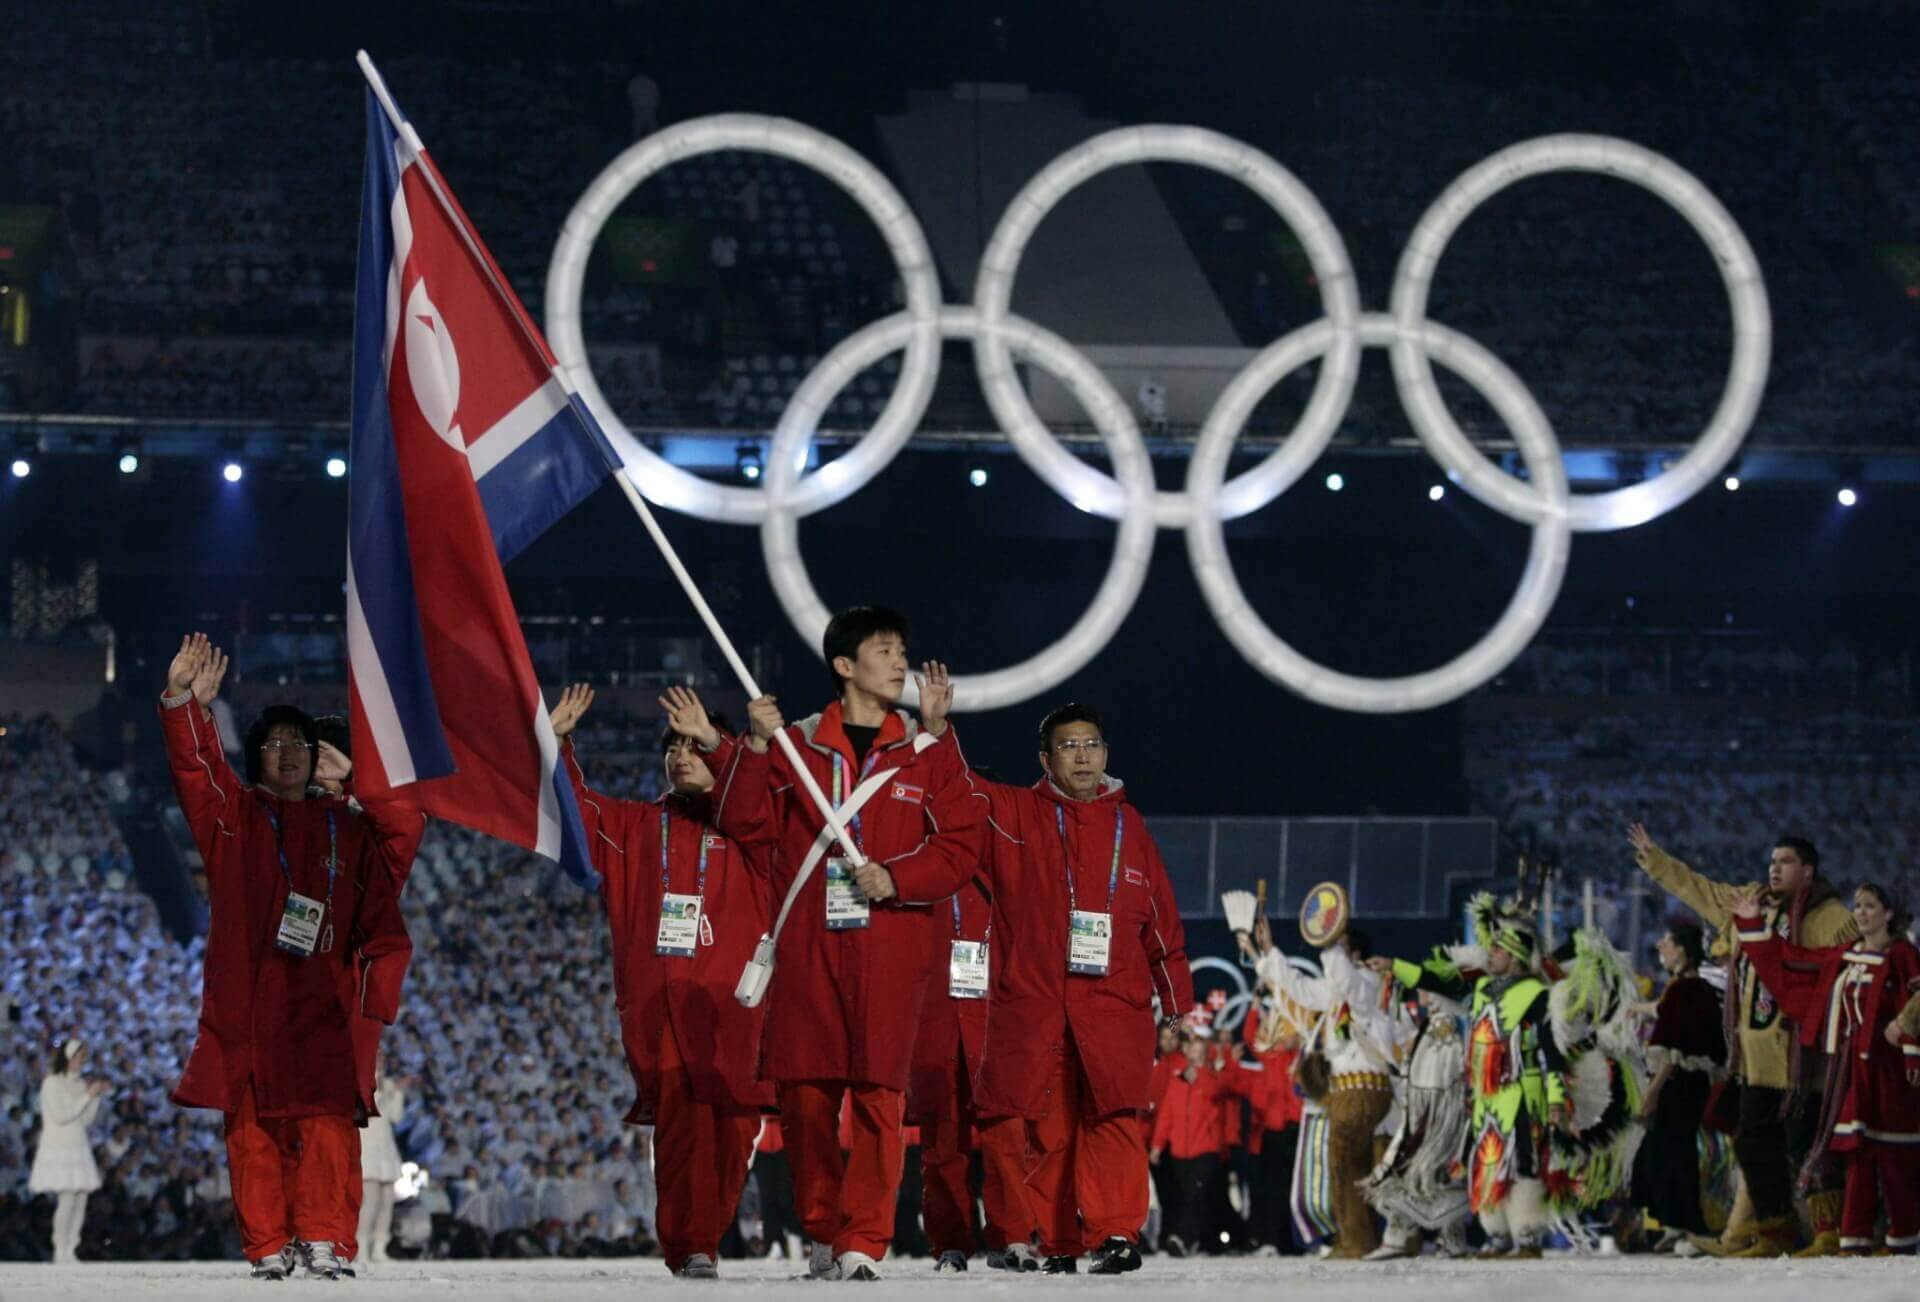 North Korea to Skip Beijing Winter Olympics, Cites COVID-19 and “Hostile Forces”